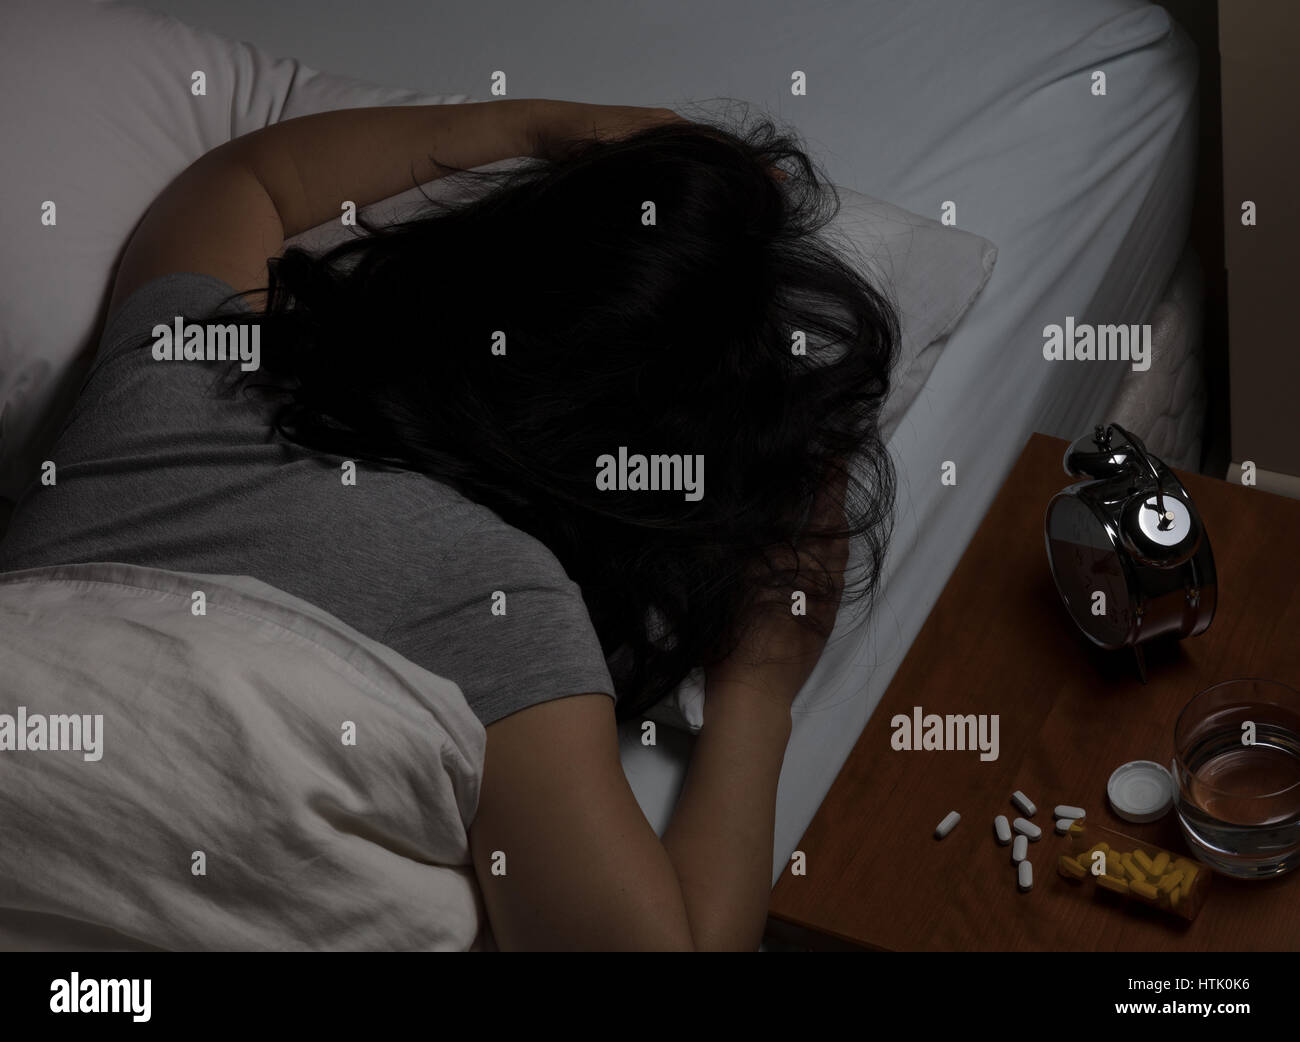 Woman lying face down in pillow with pills spilled on night stand. Depression and addiction concept. Stock Photo